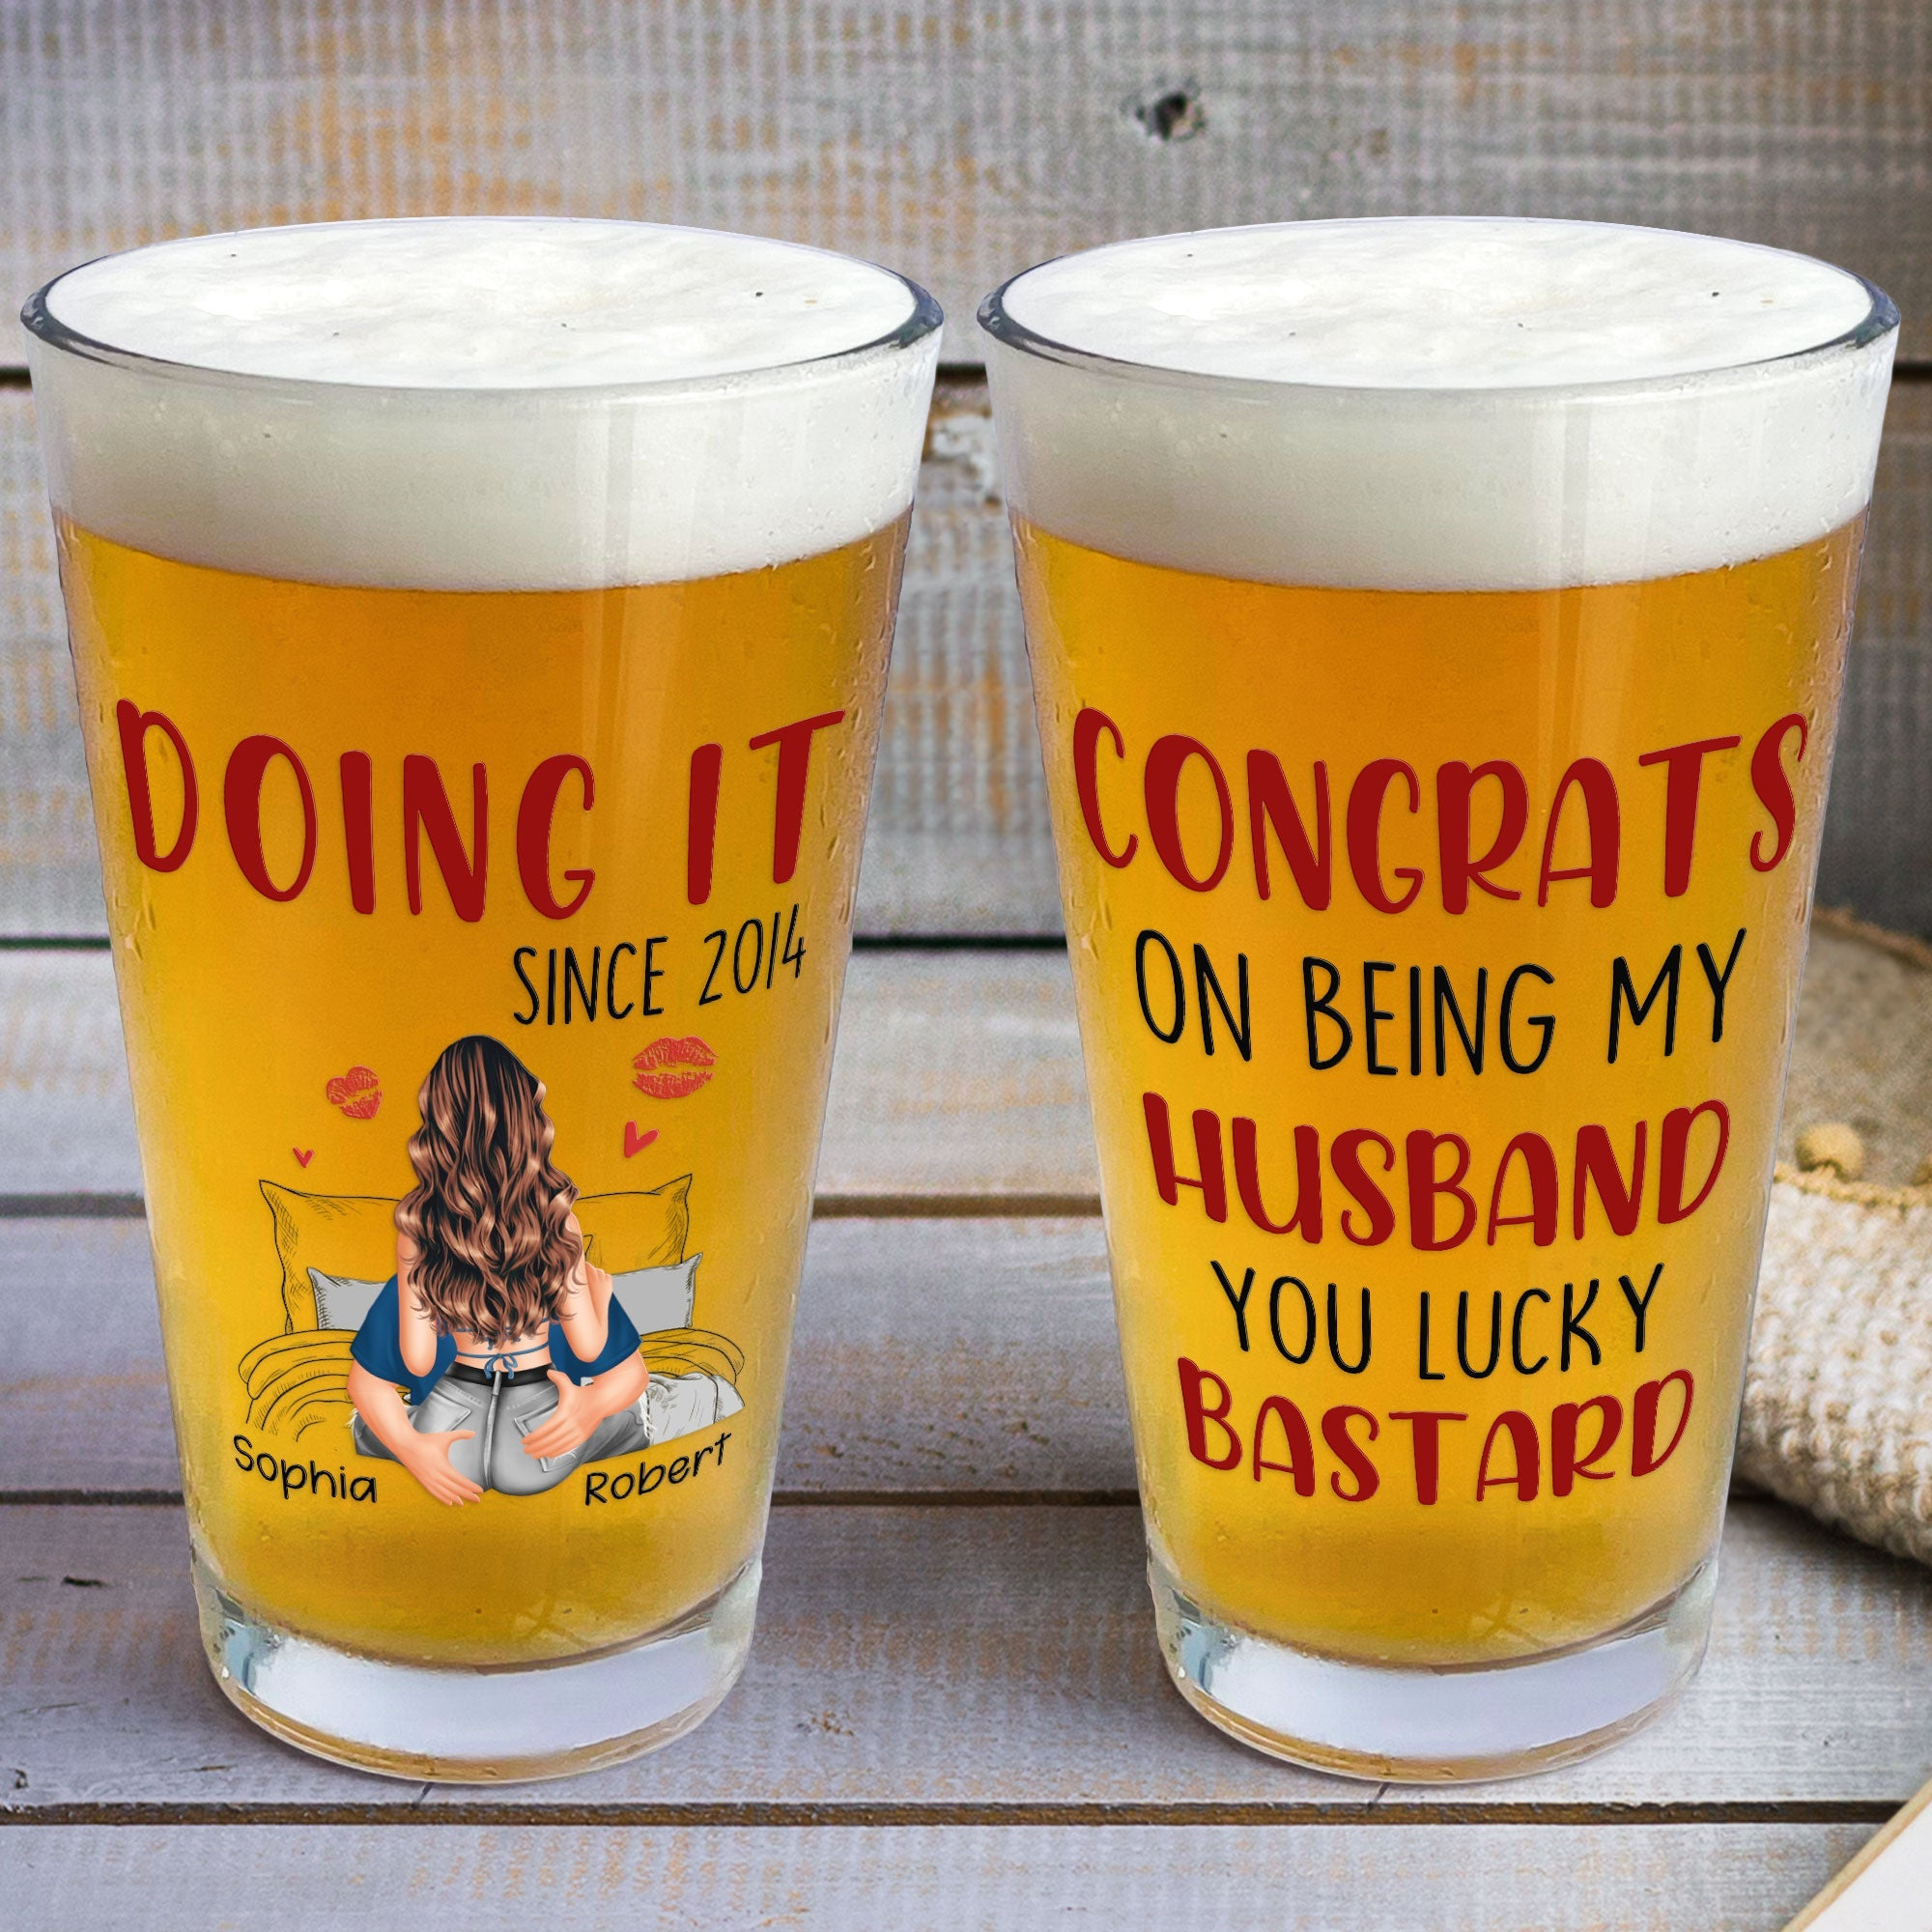 Congrats On Being My Husband (Doing It Since) - Personalized Beer Glass